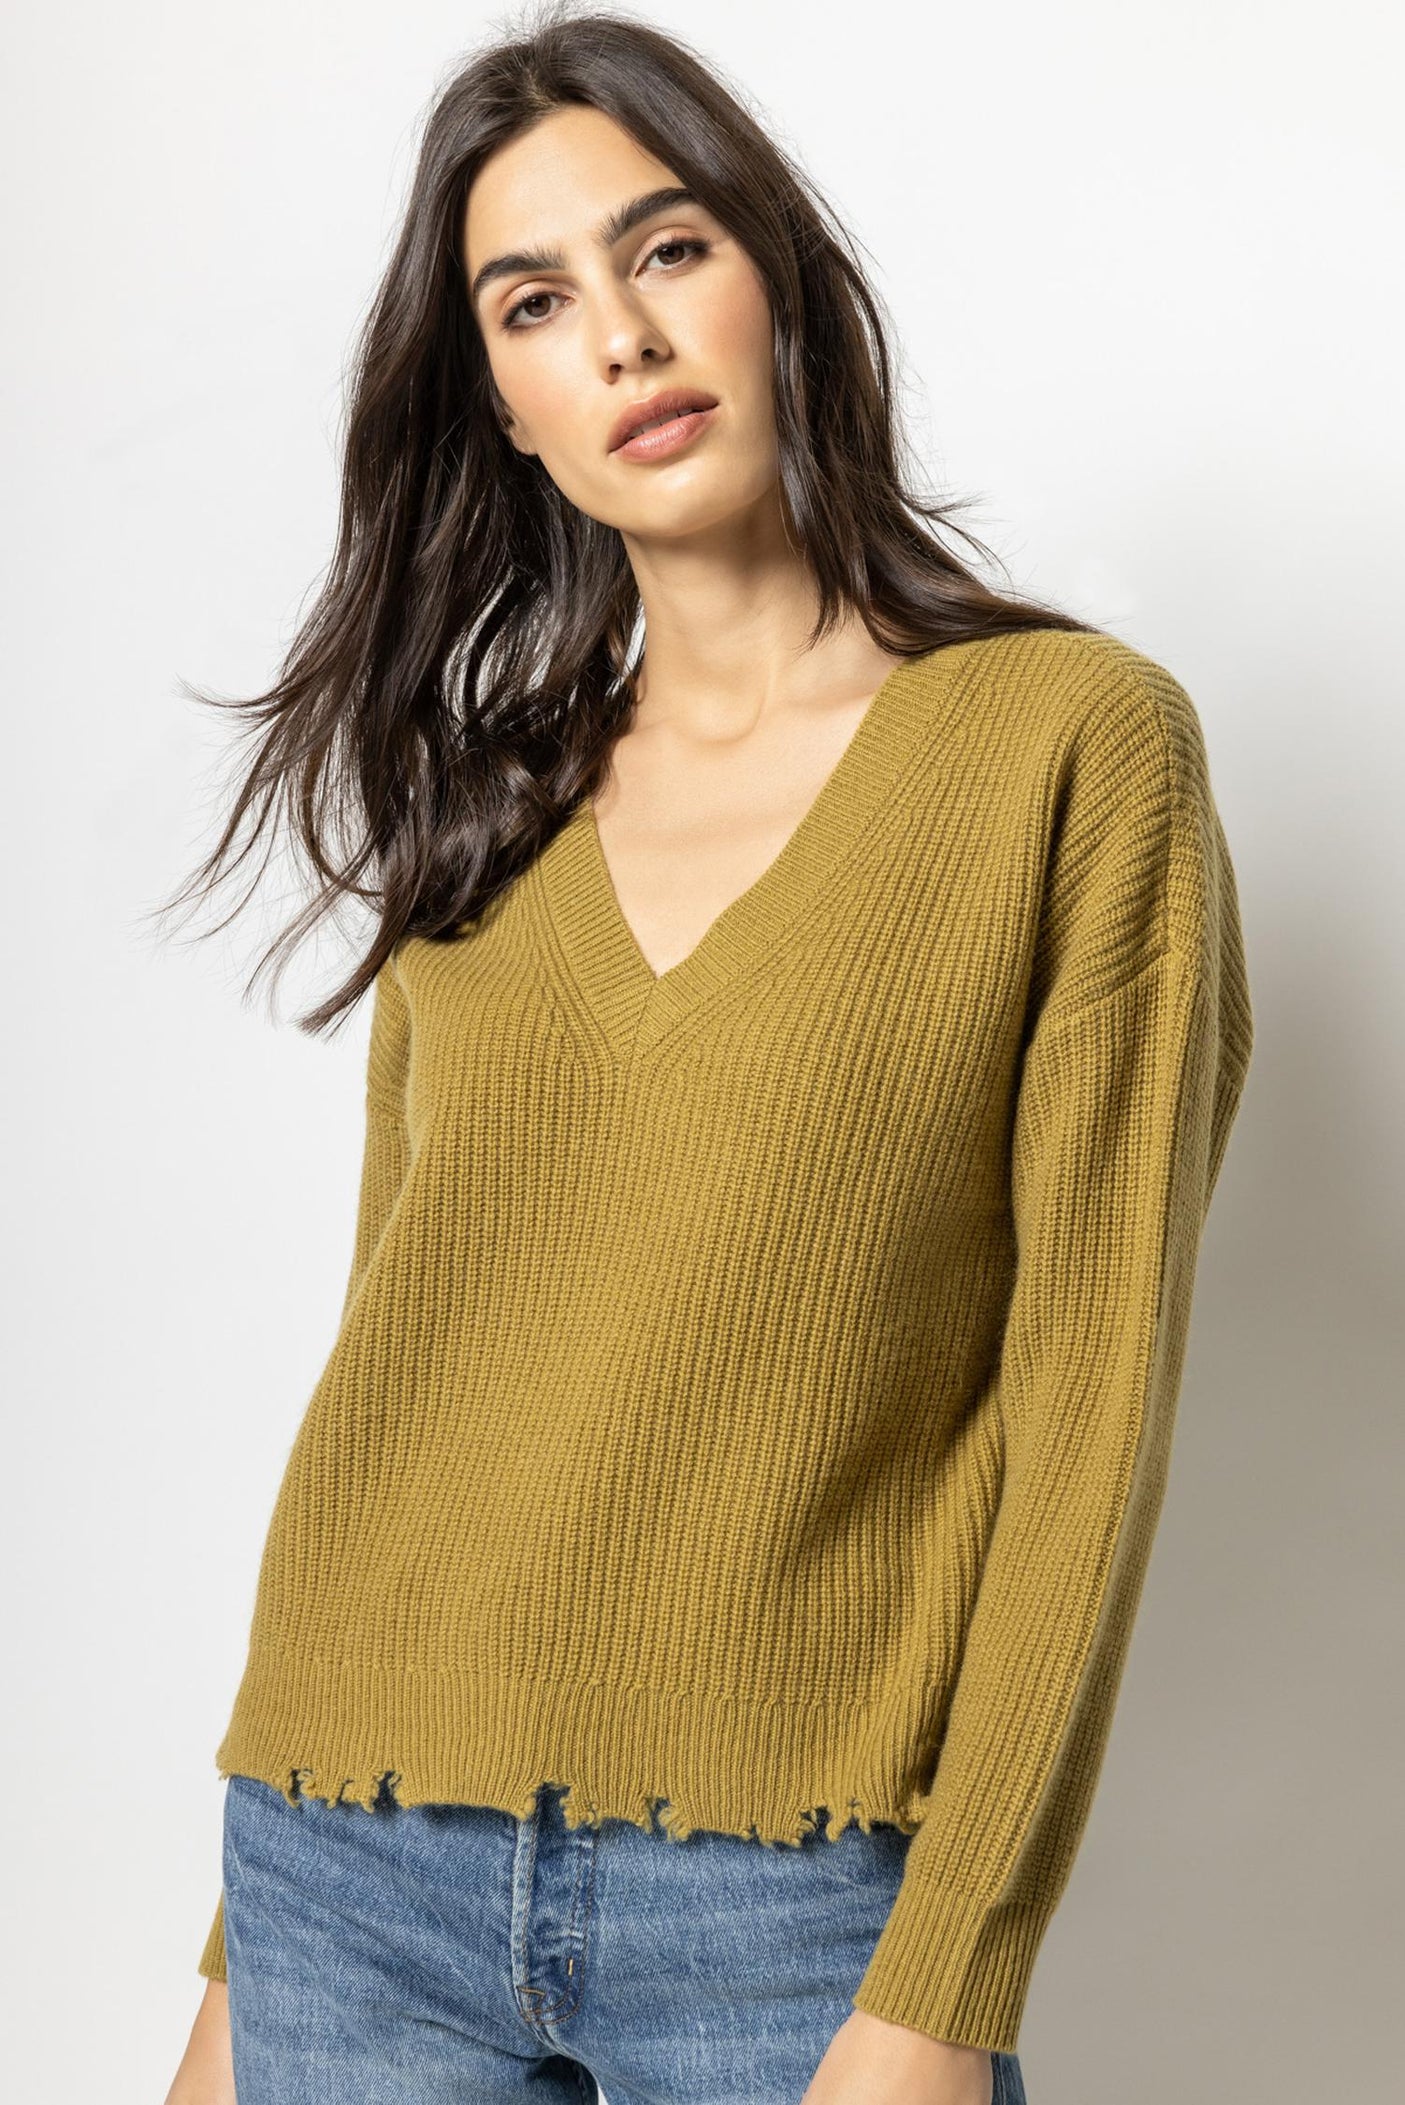 Liberal Youth Ministry V-neck distressed-effect Jumper - Farfetch